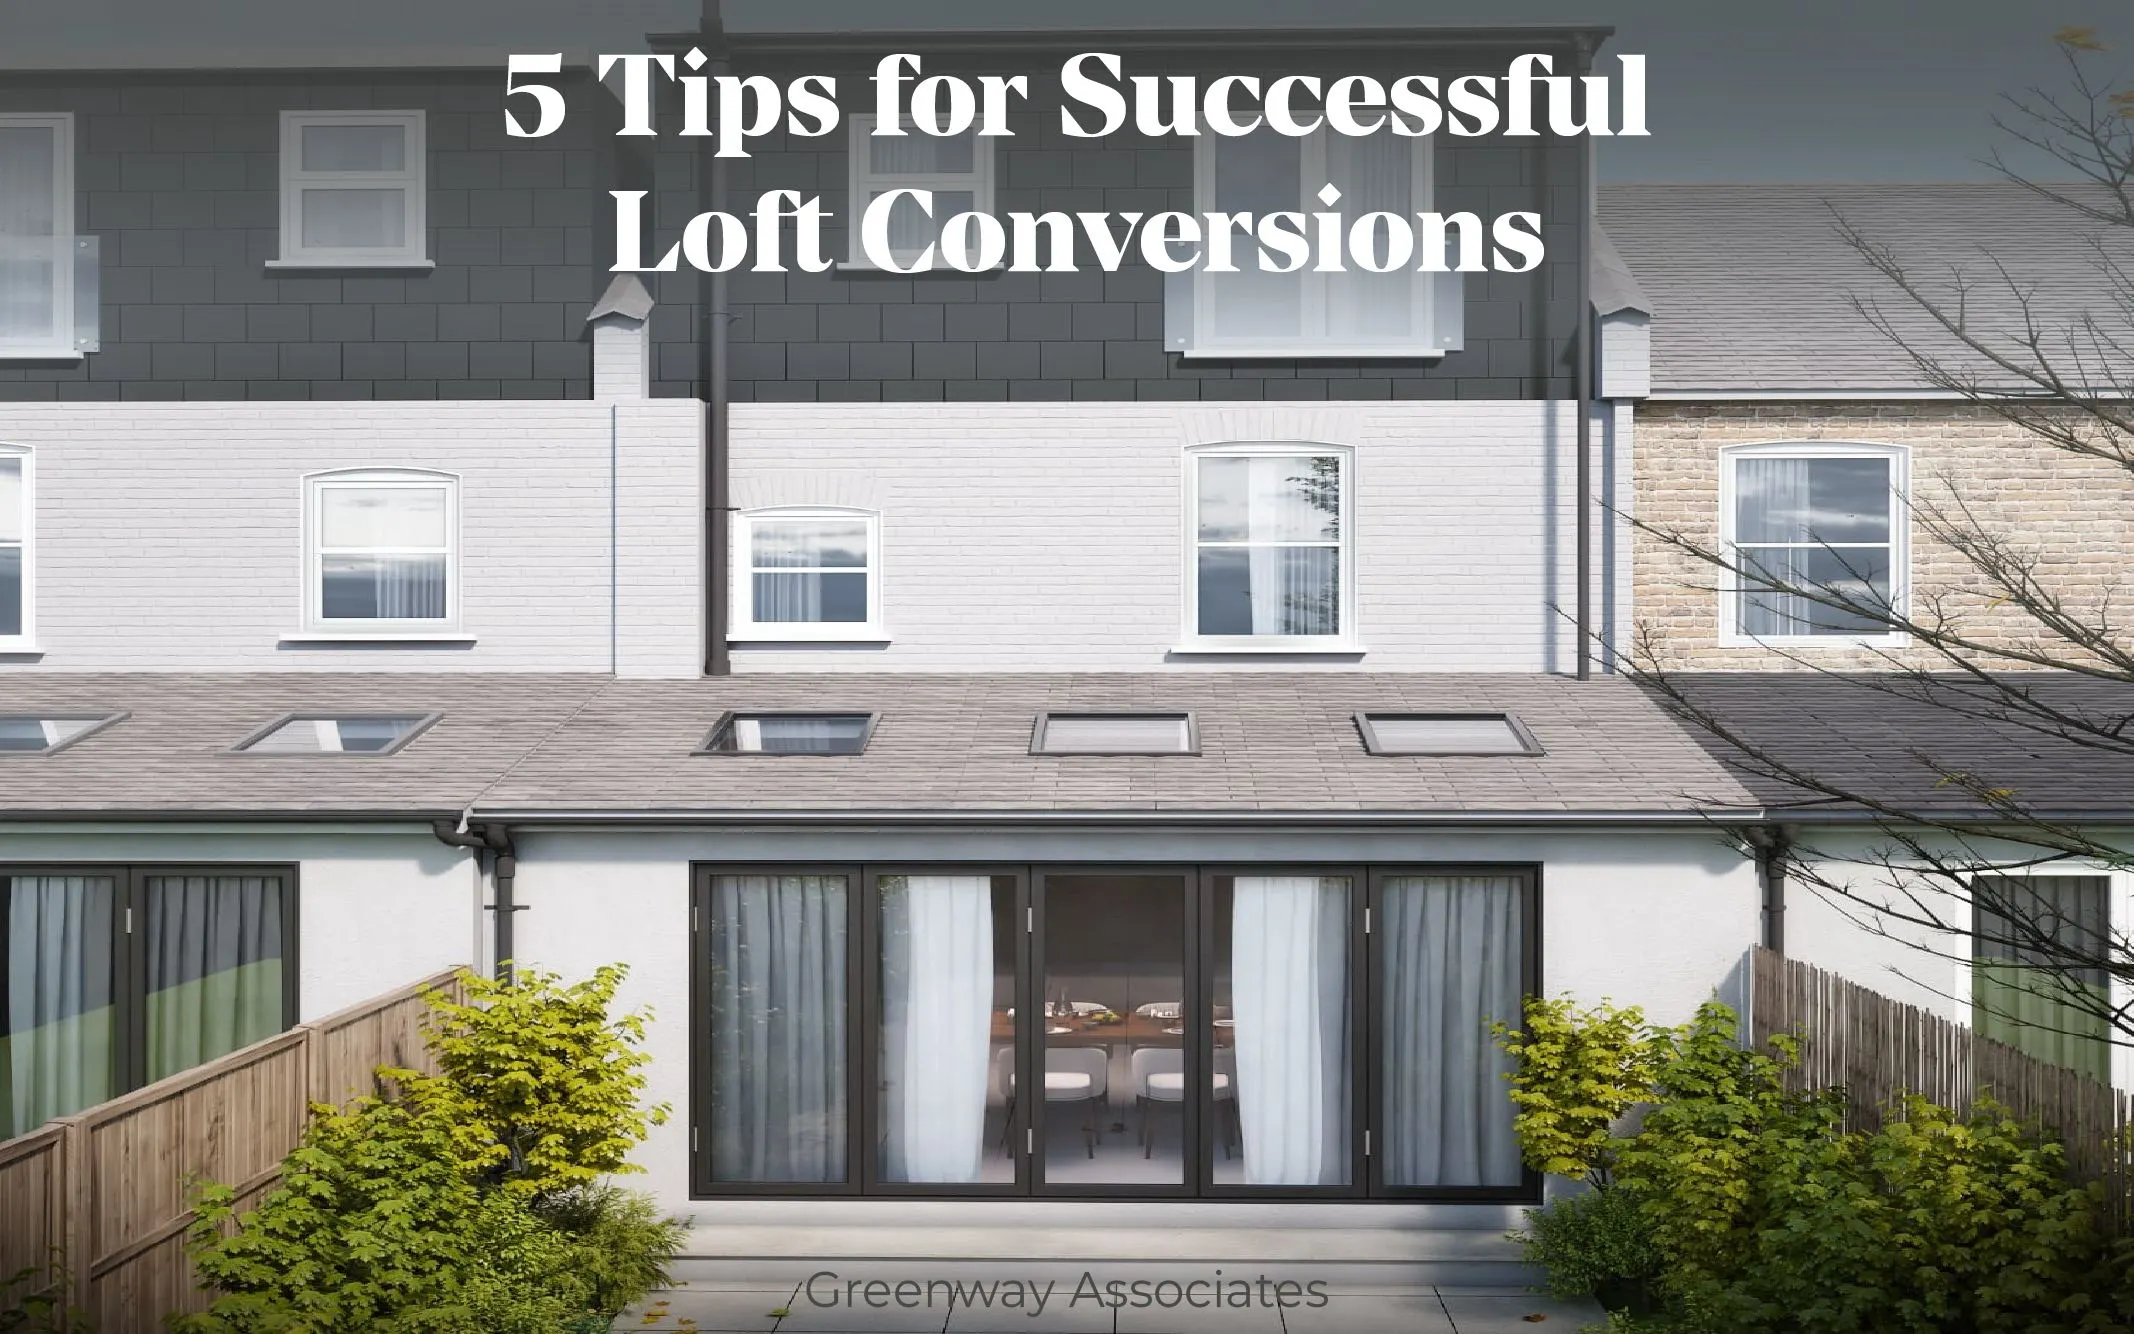 5 tips for Successful Loft Conversions